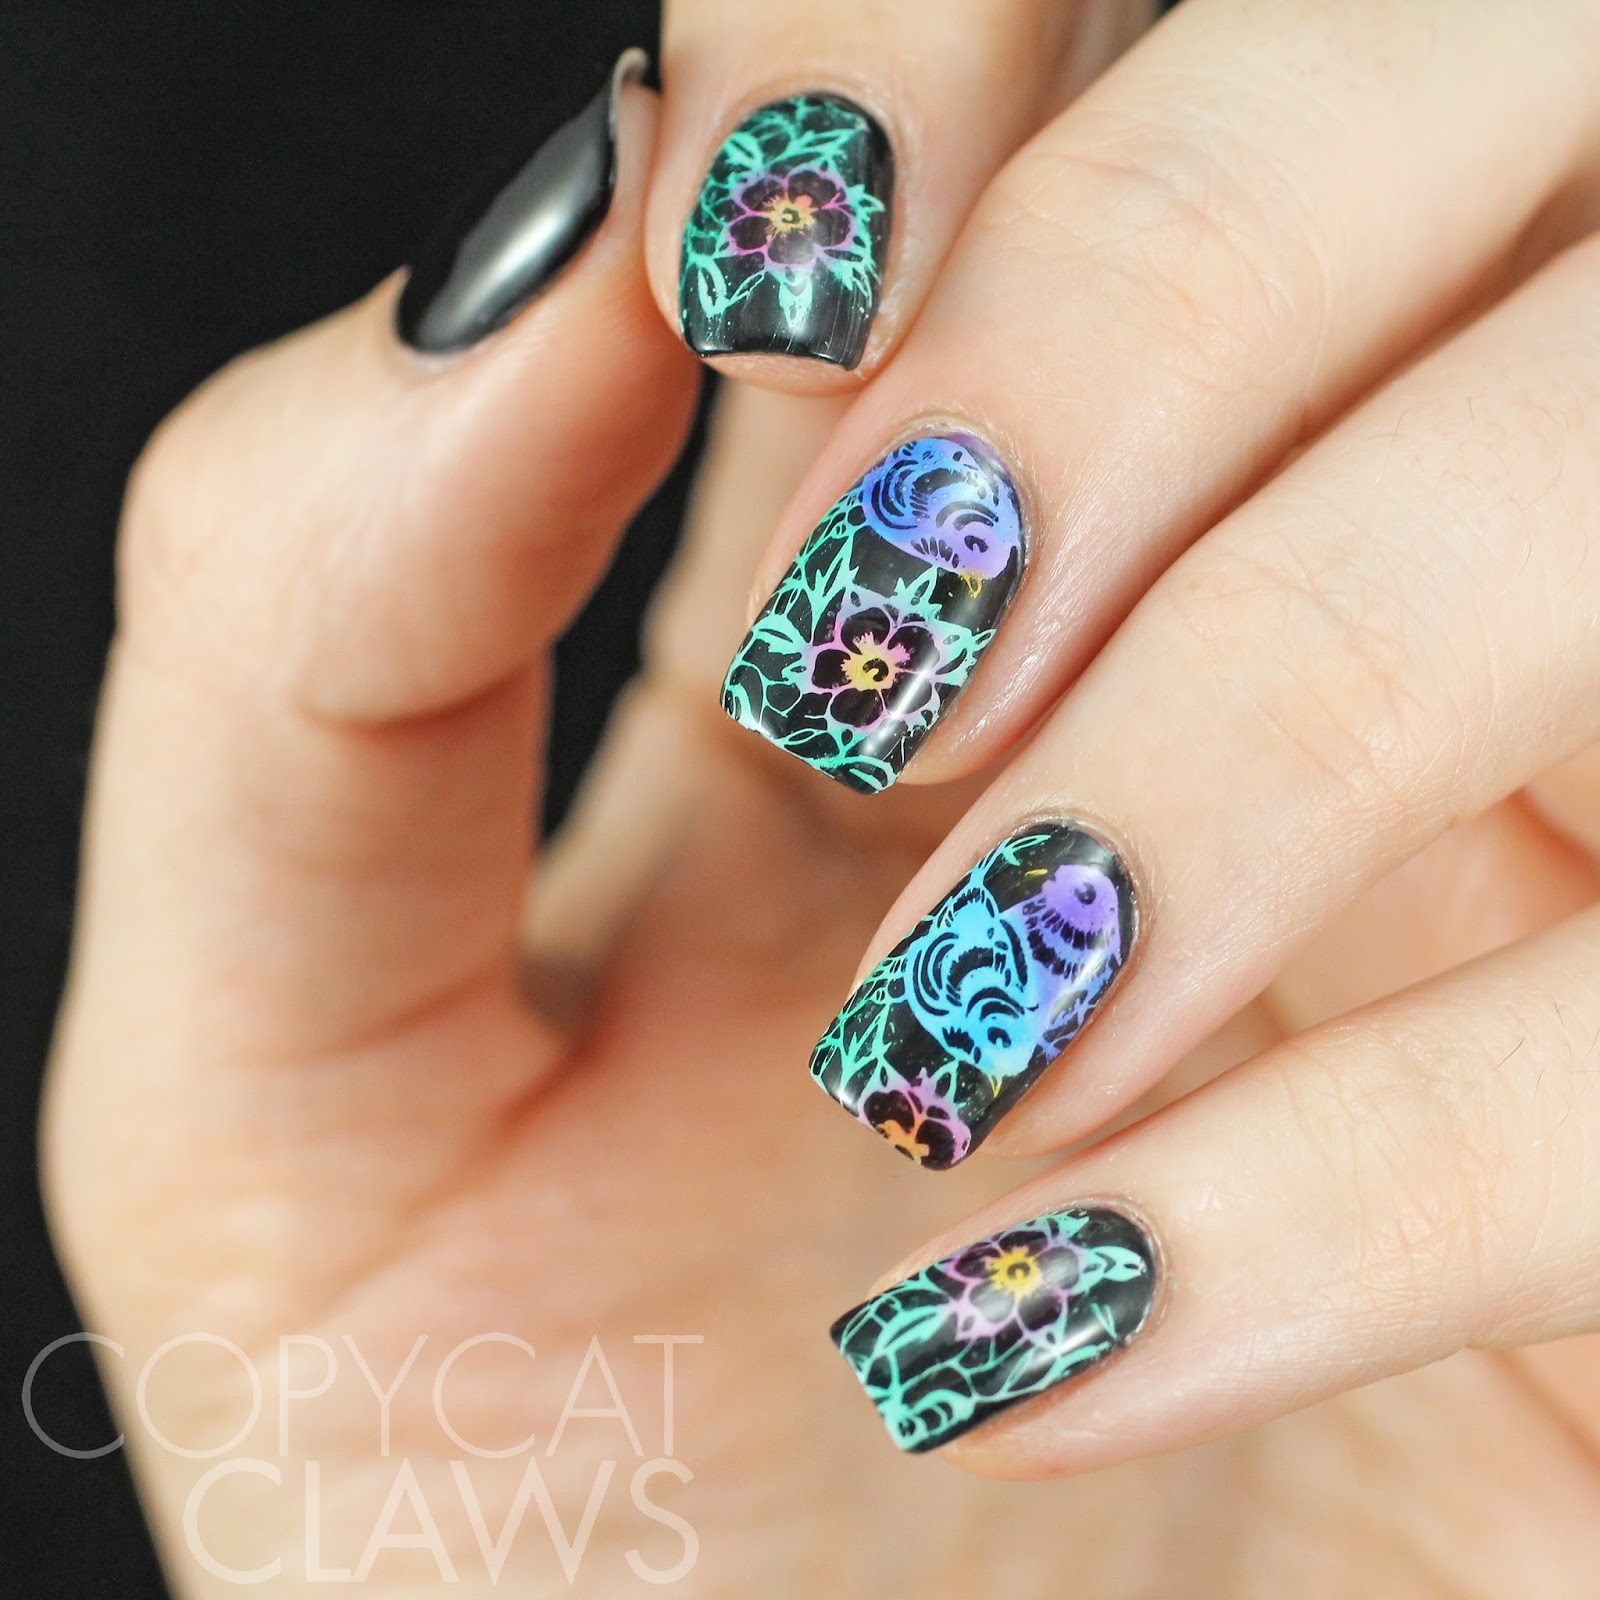 Copycat Claws: UberChic Beauty The Far East -02 Stamping Plate Review